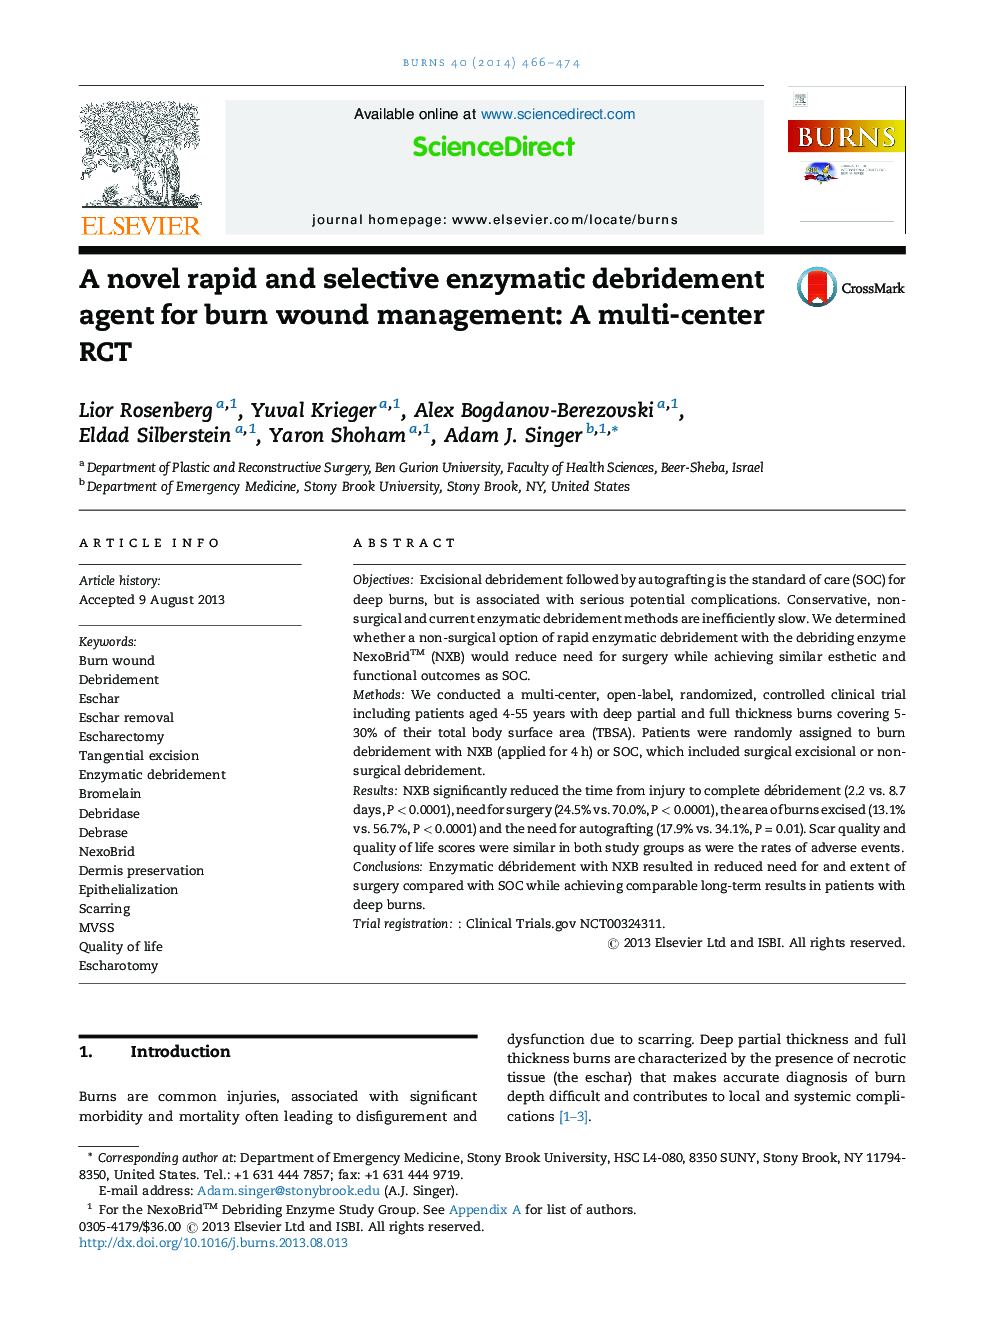 A novel rapid and selective enzymatic debridement agent for burn wound management: A multi-center RCT